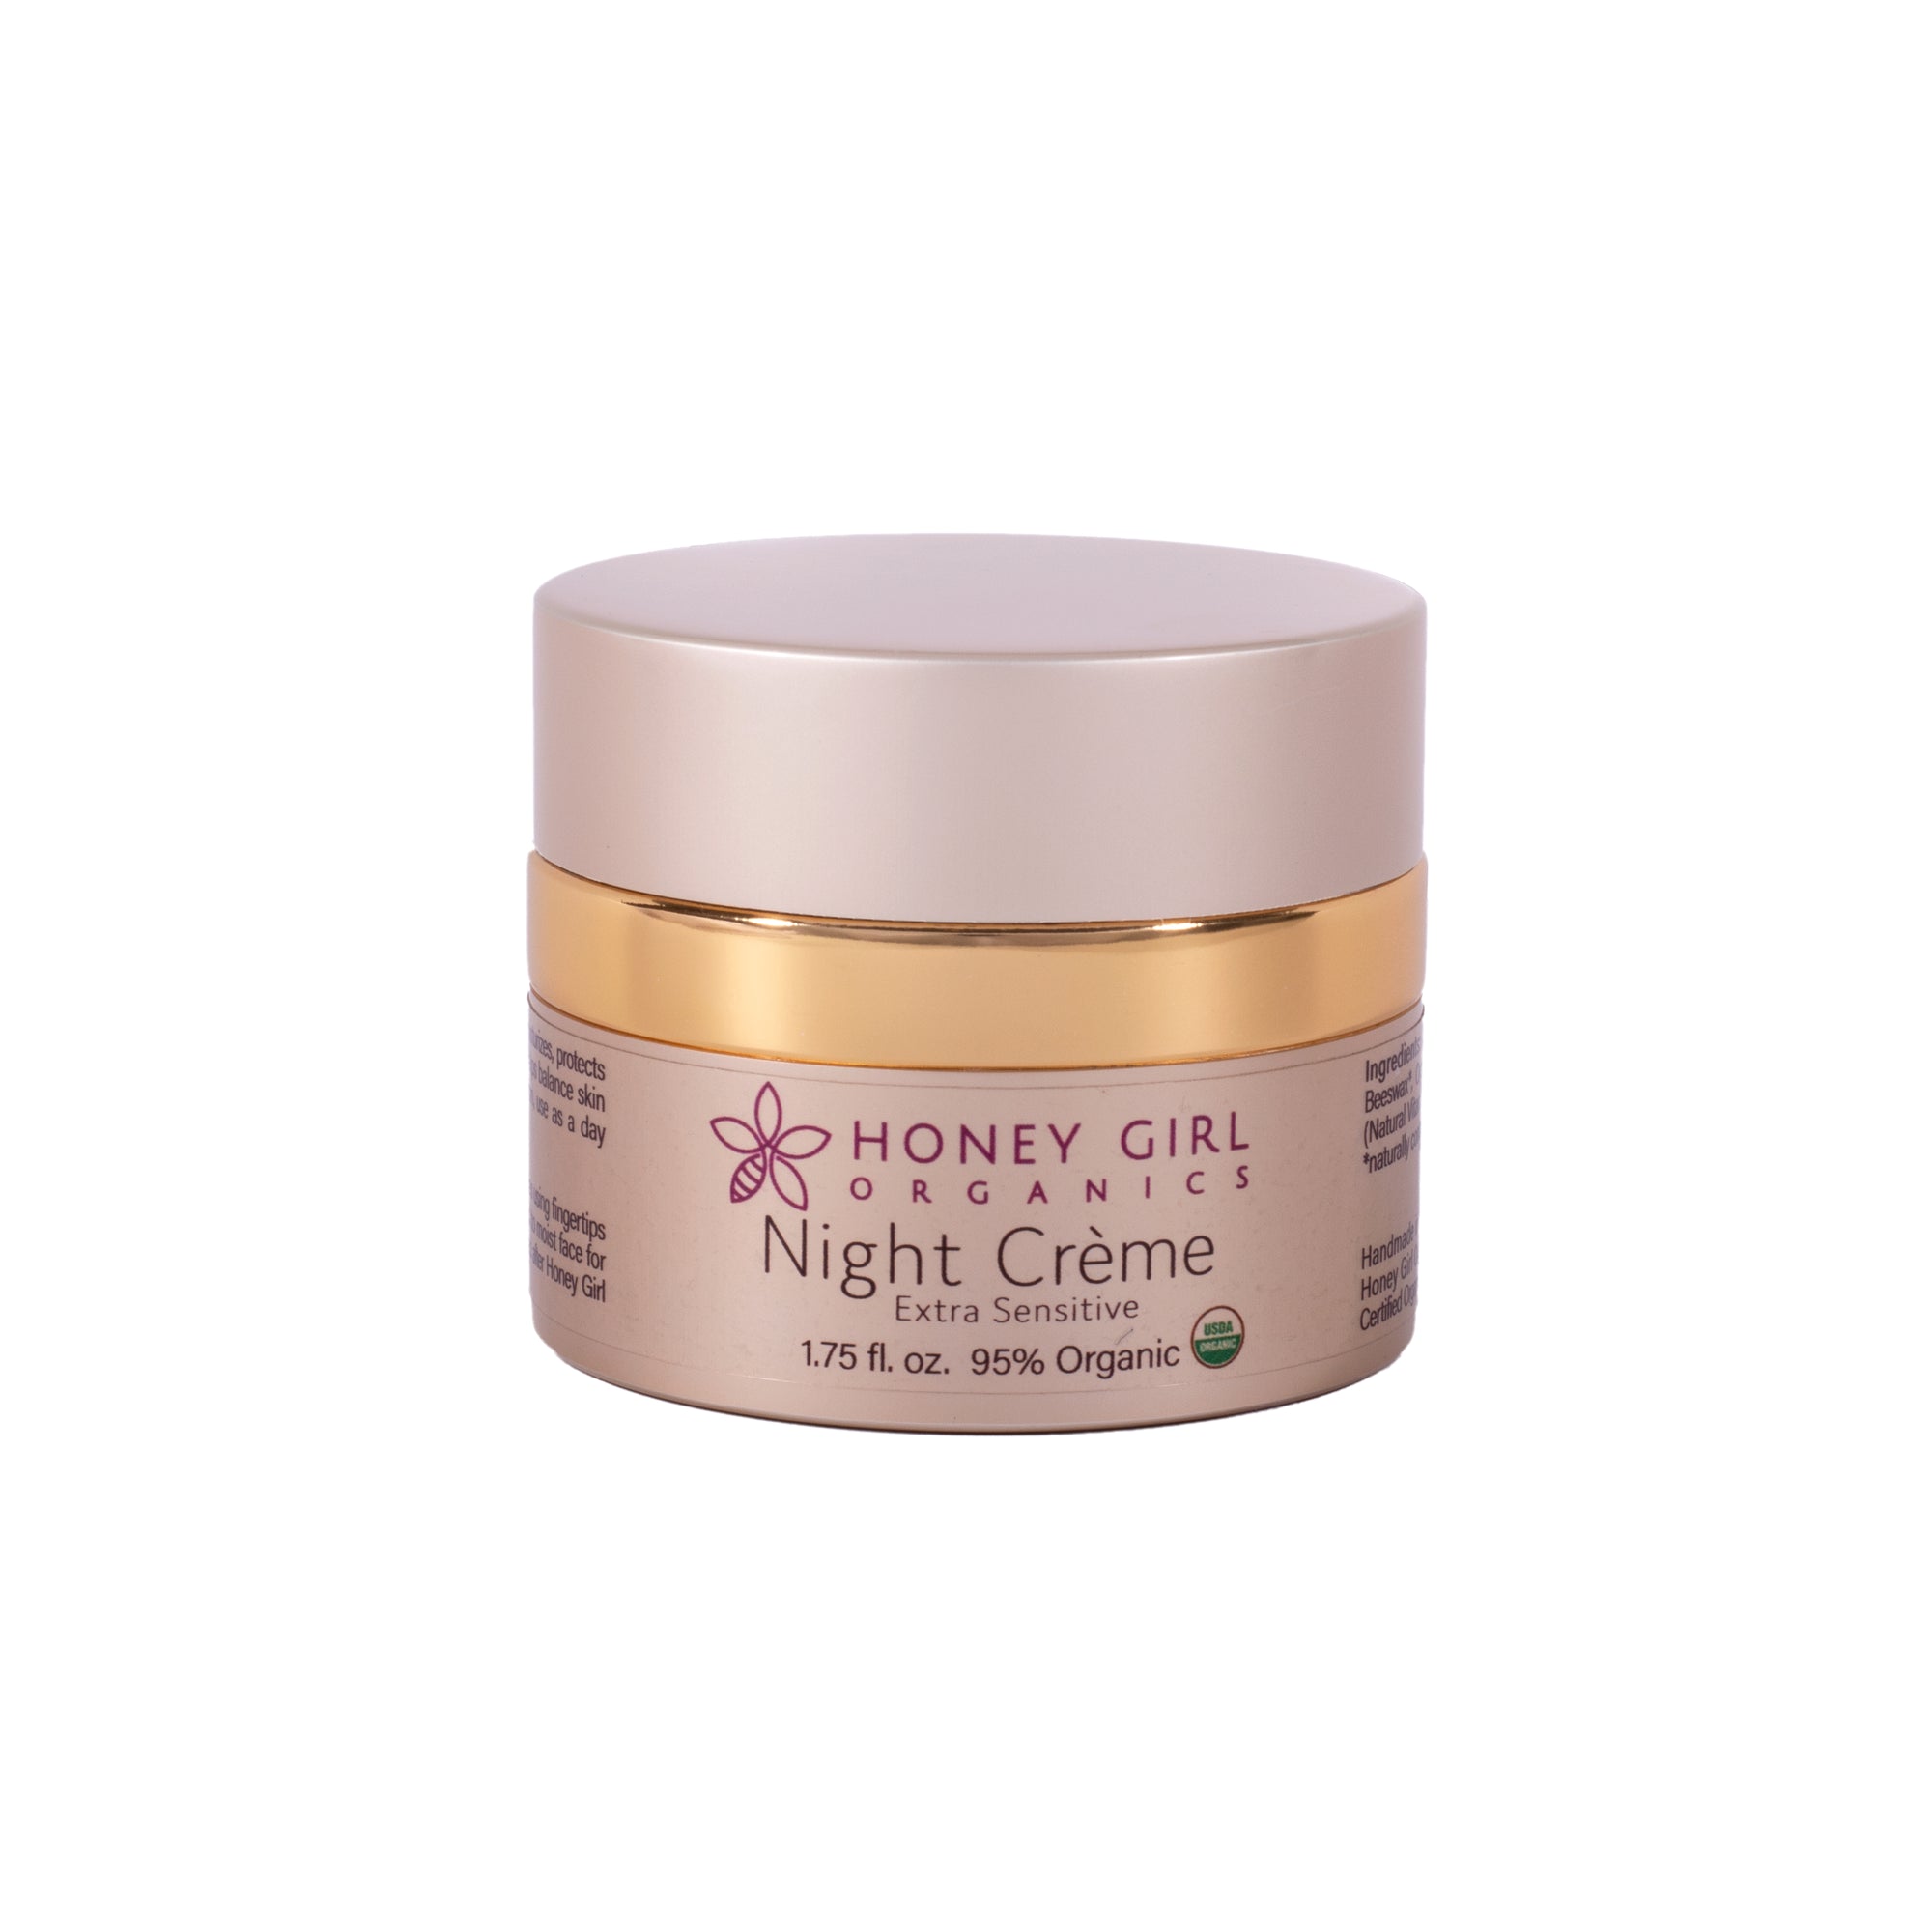 Night Cream Extra Sensitive 1.75oz | Honey Girl | Raw Living UK | Honey Girl Organics Night Cream (Sensitive): Hydrate and Nourish your skin while you sleep. This luxury cream deeply Moisturises, Nourishes, Tones & Protects.